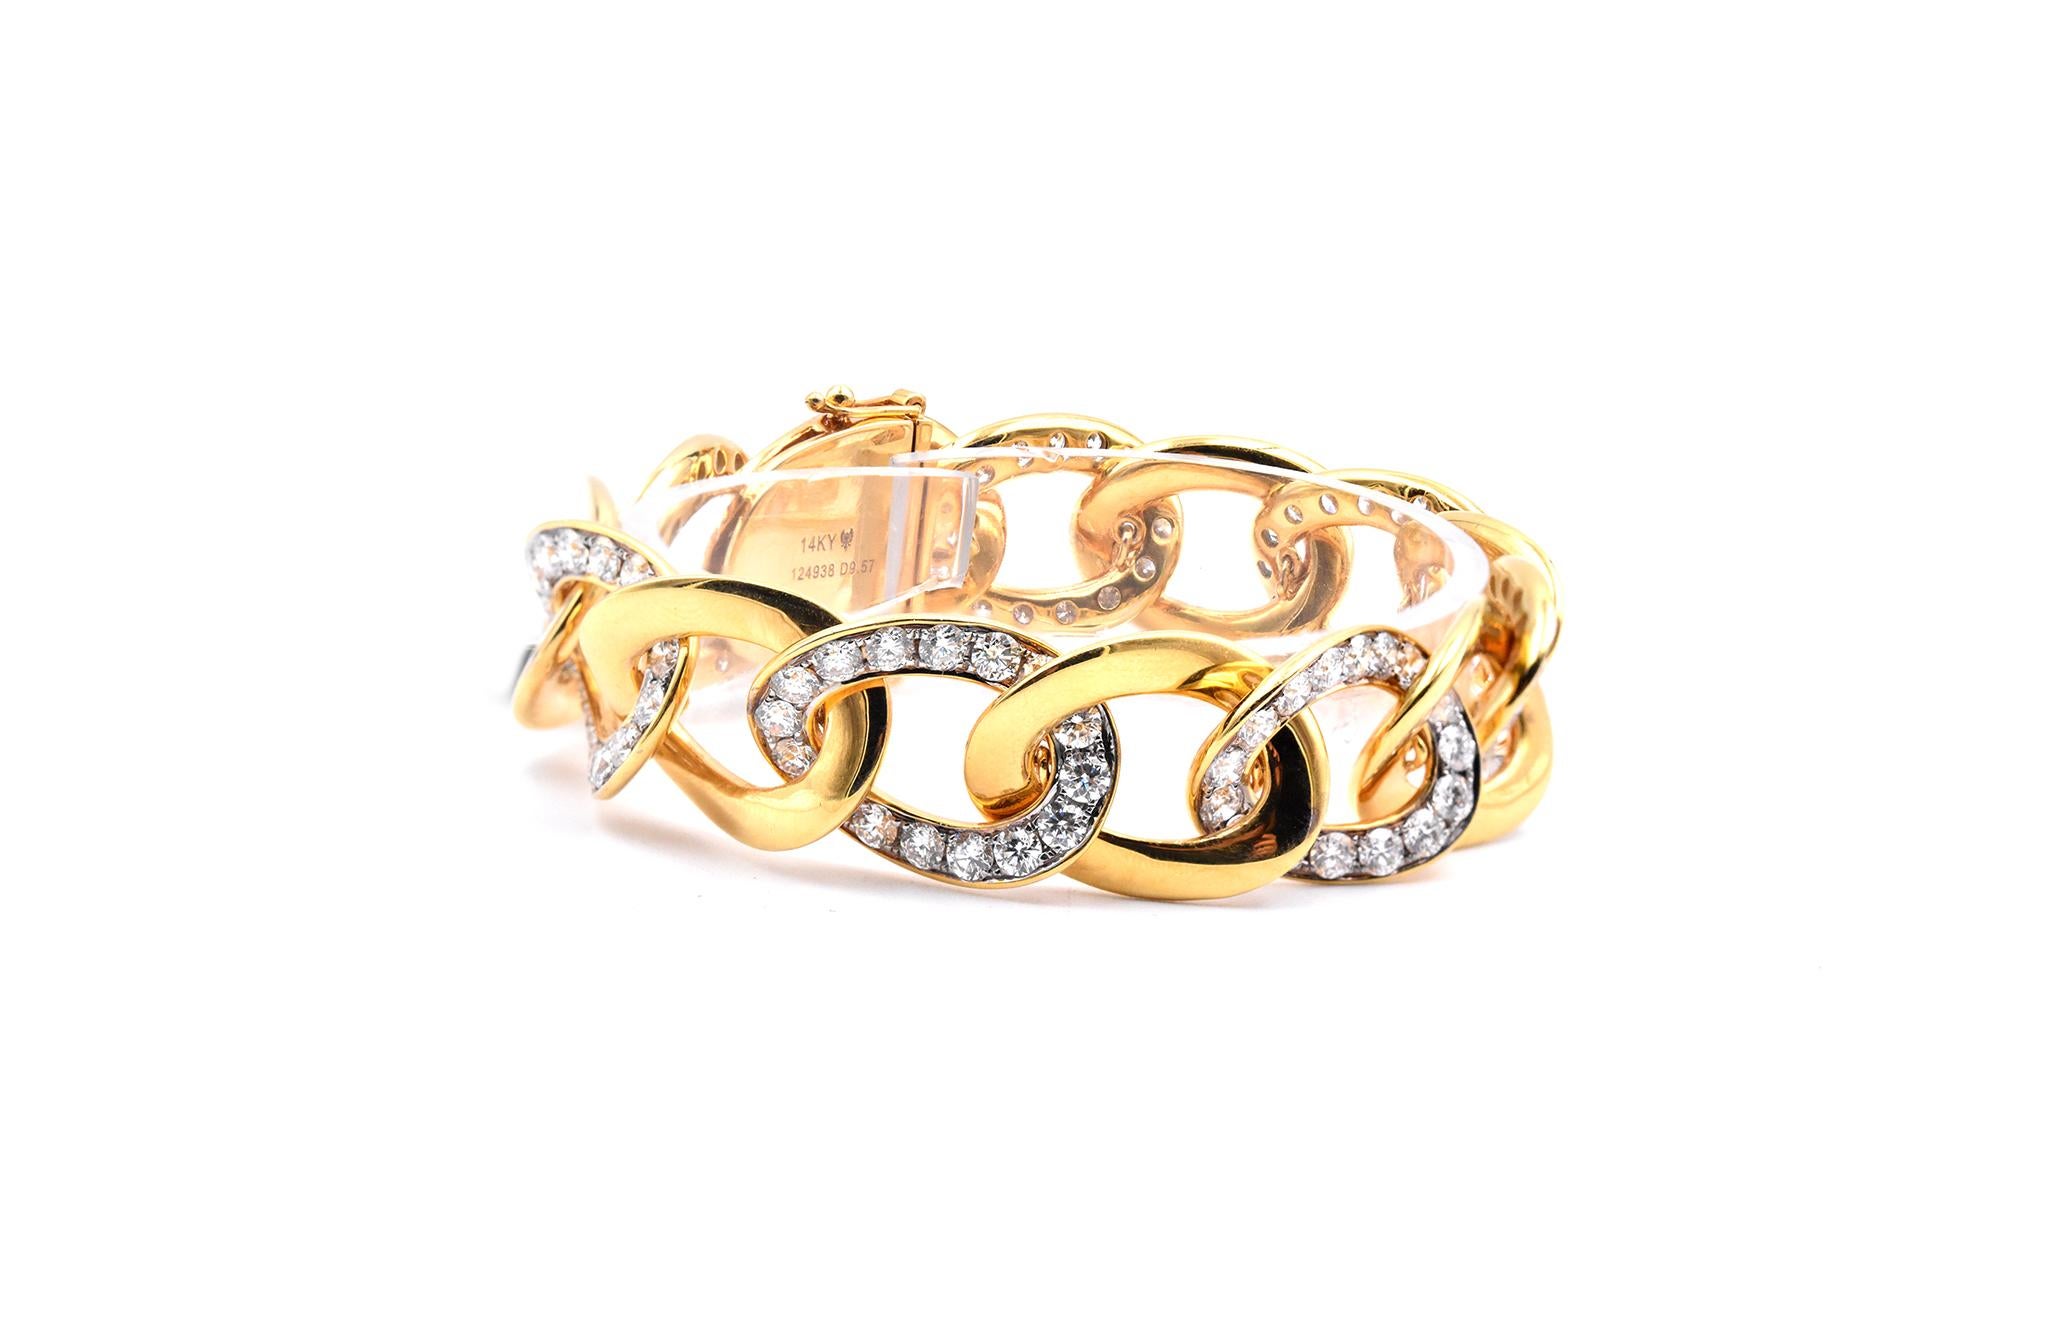 Material: 14K yellow gold
Diamonds:  112 round cut = 9.57cttw
Color: G
Clarity: VS1
Dimensions: bracelet will fit up to a 7-inch wrist
Weight: 49.66 grams
